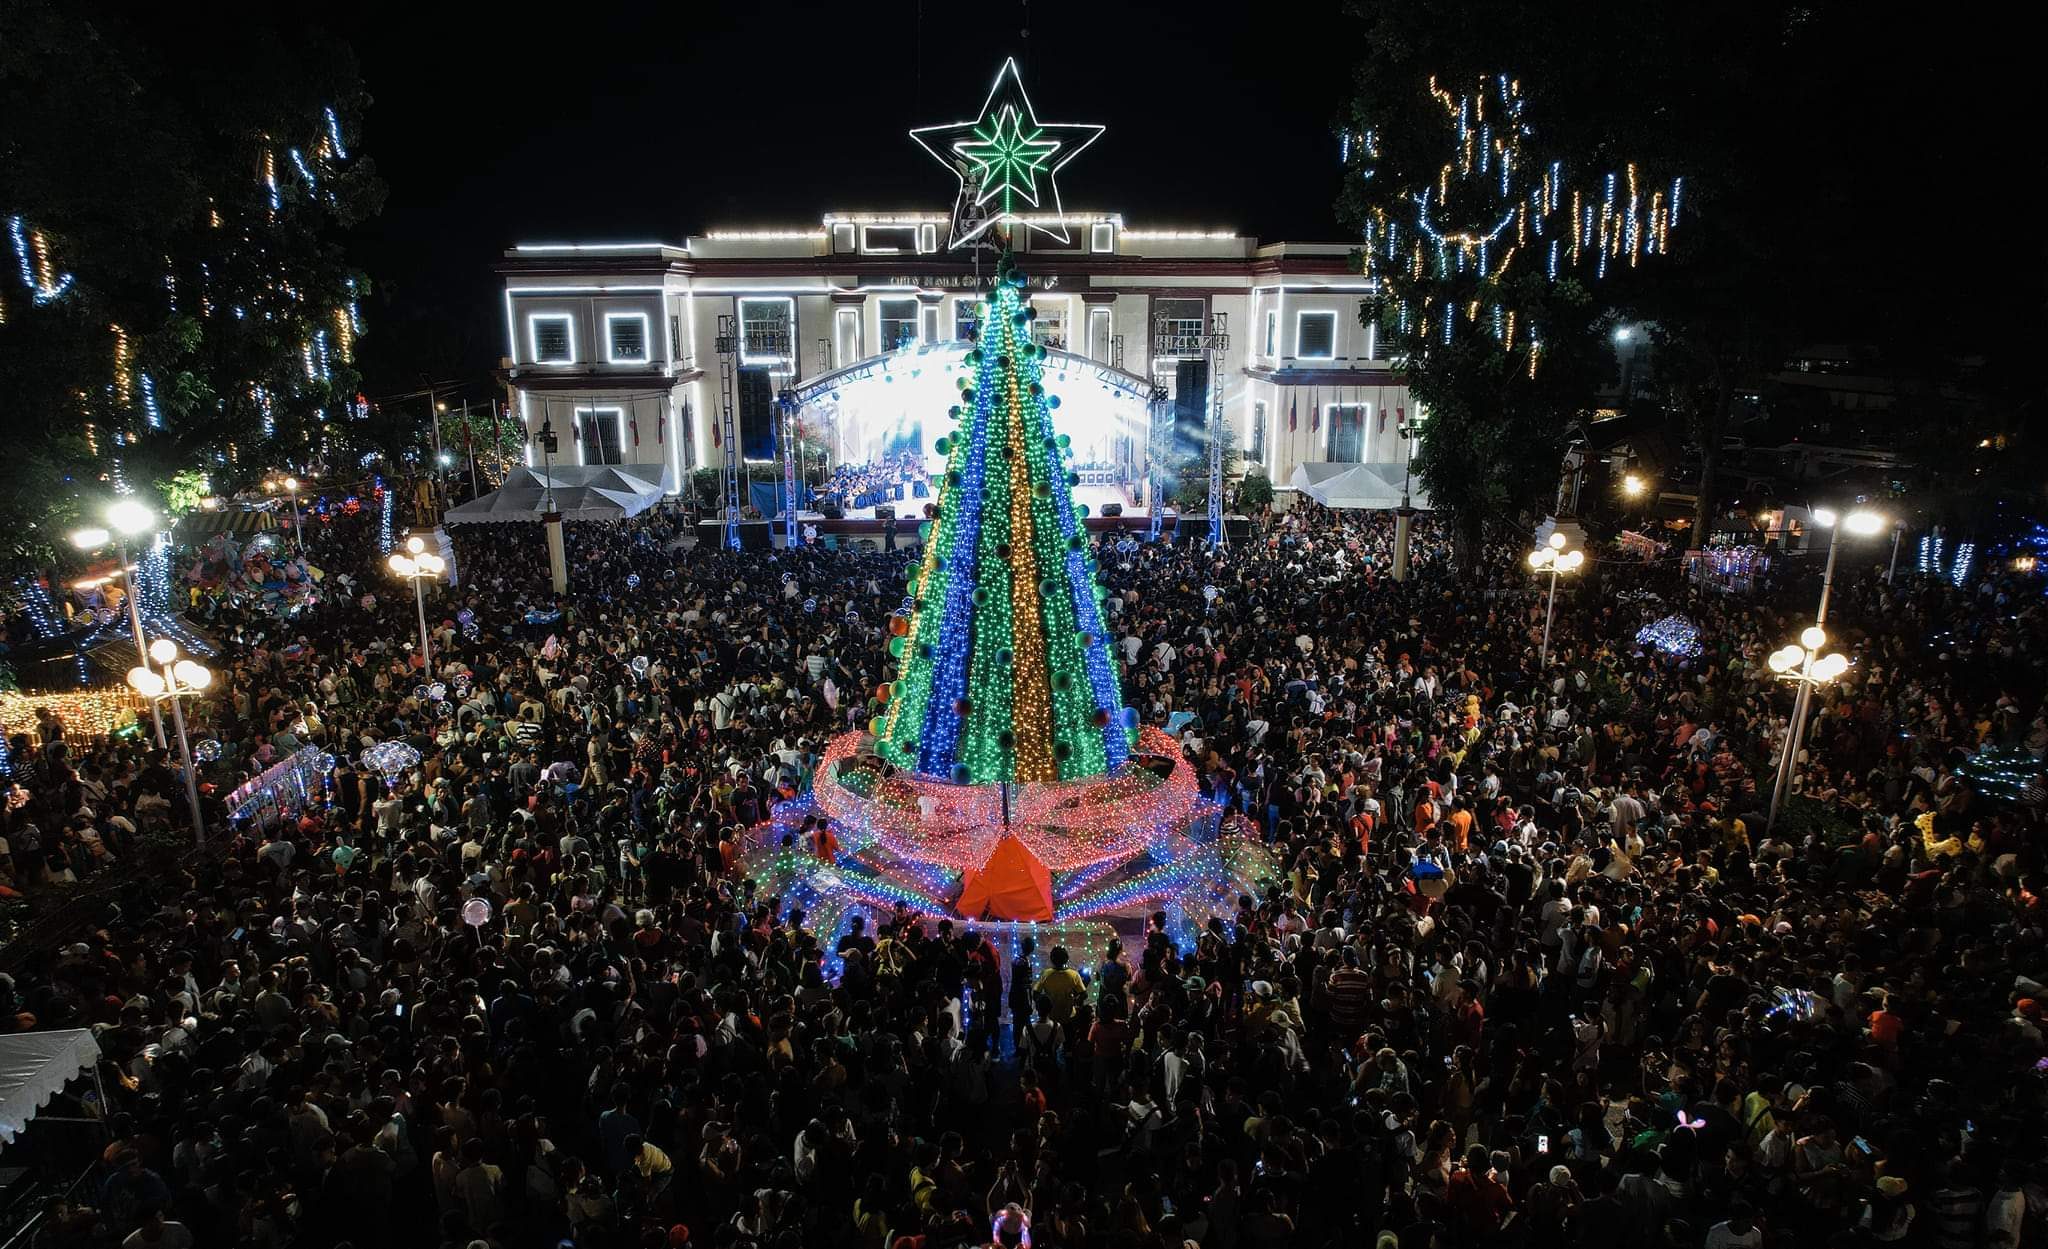 10,000 gather as Victorias sparkles with festive Christmas lights 